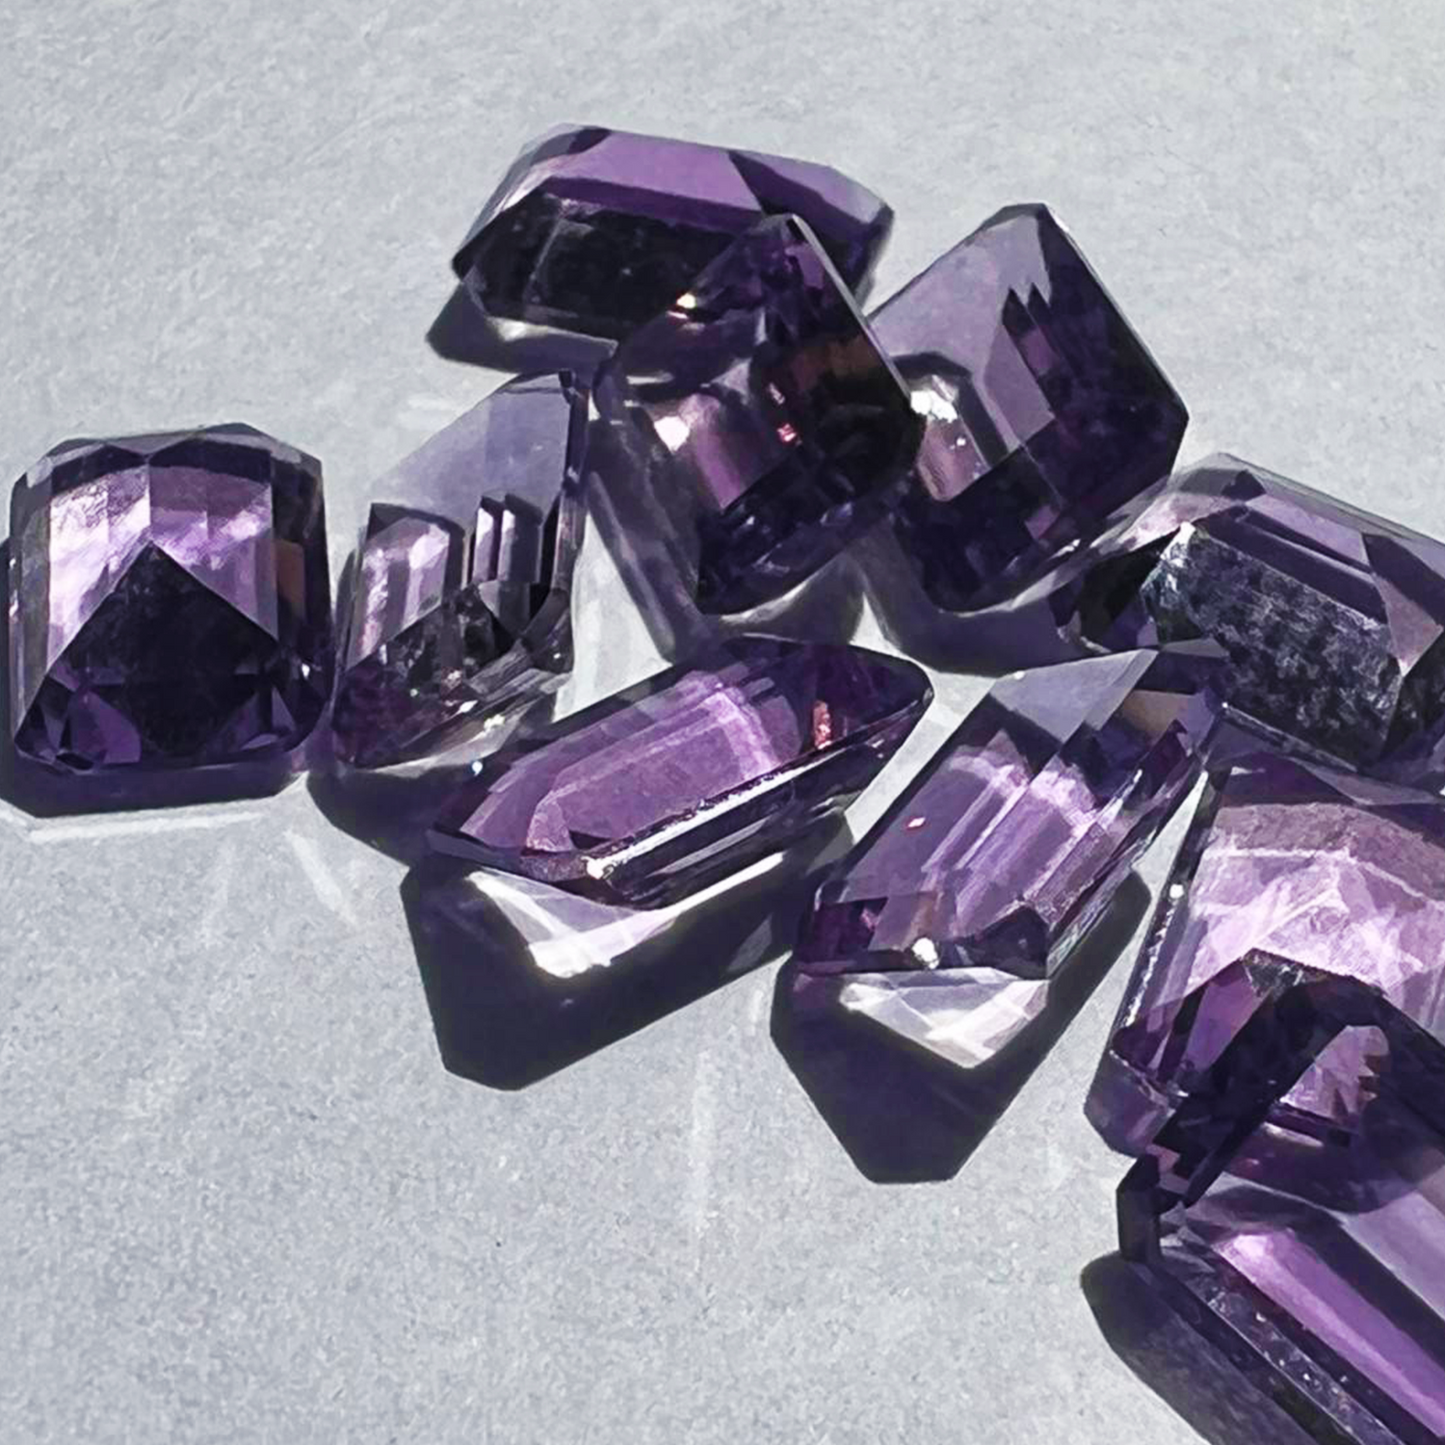 [Amethyst] bind with oval gold #authentic